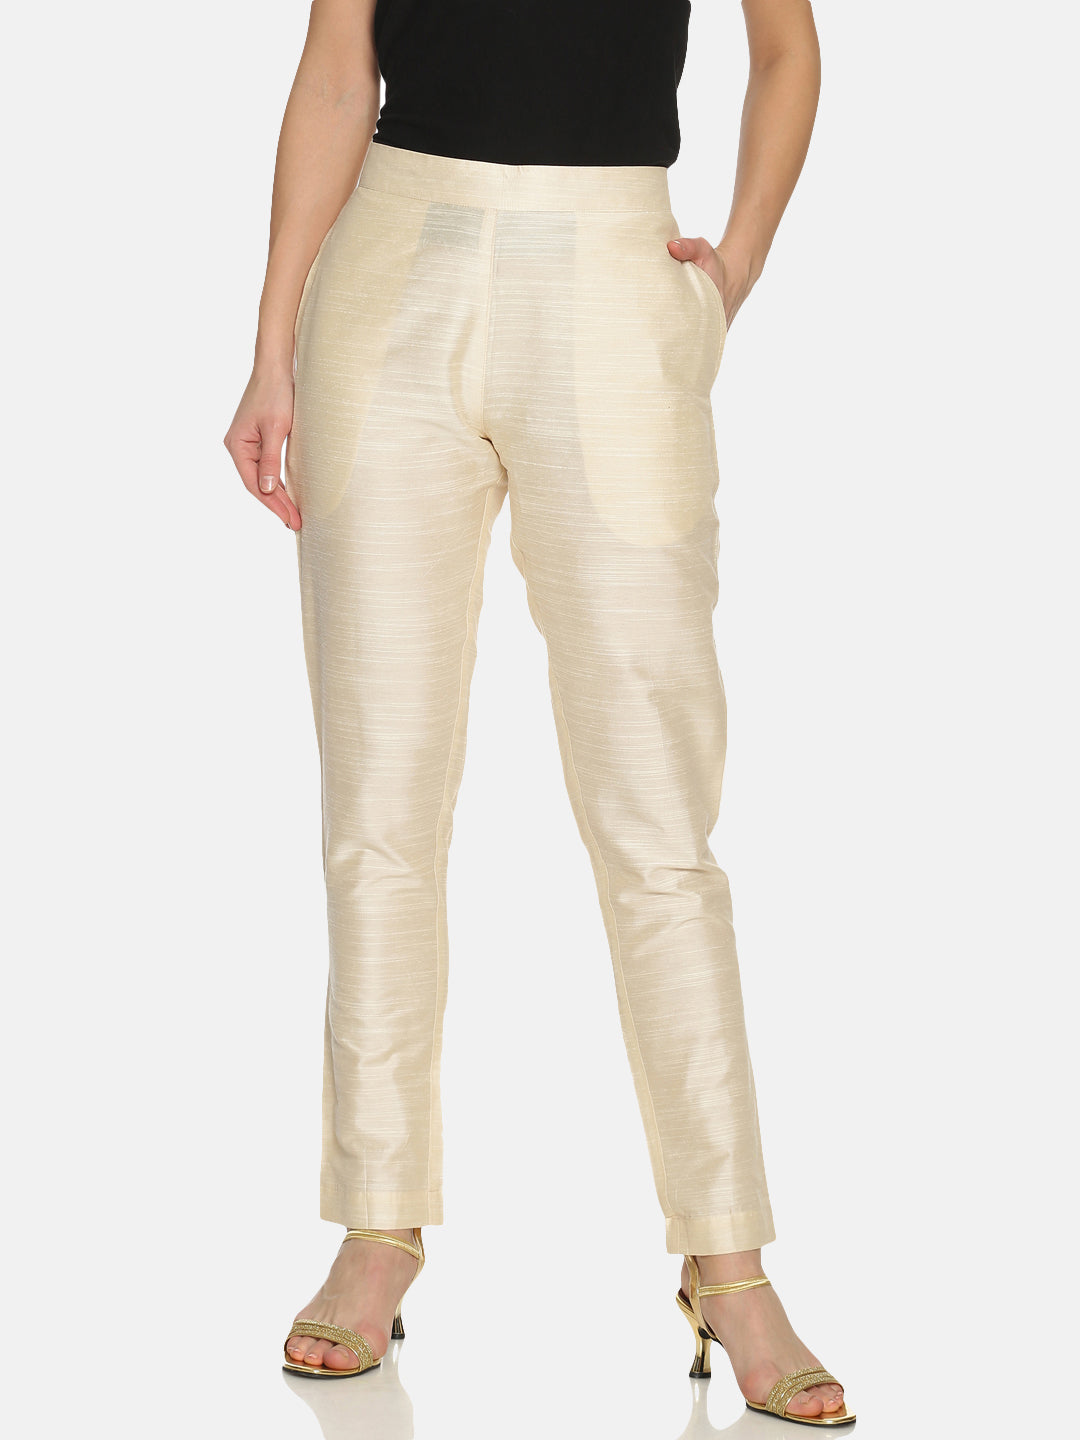 Juniper Indianwear  Buy Juniper White Grey Cotton Solid Cigarette Pant  Online  Nykaa Fashion